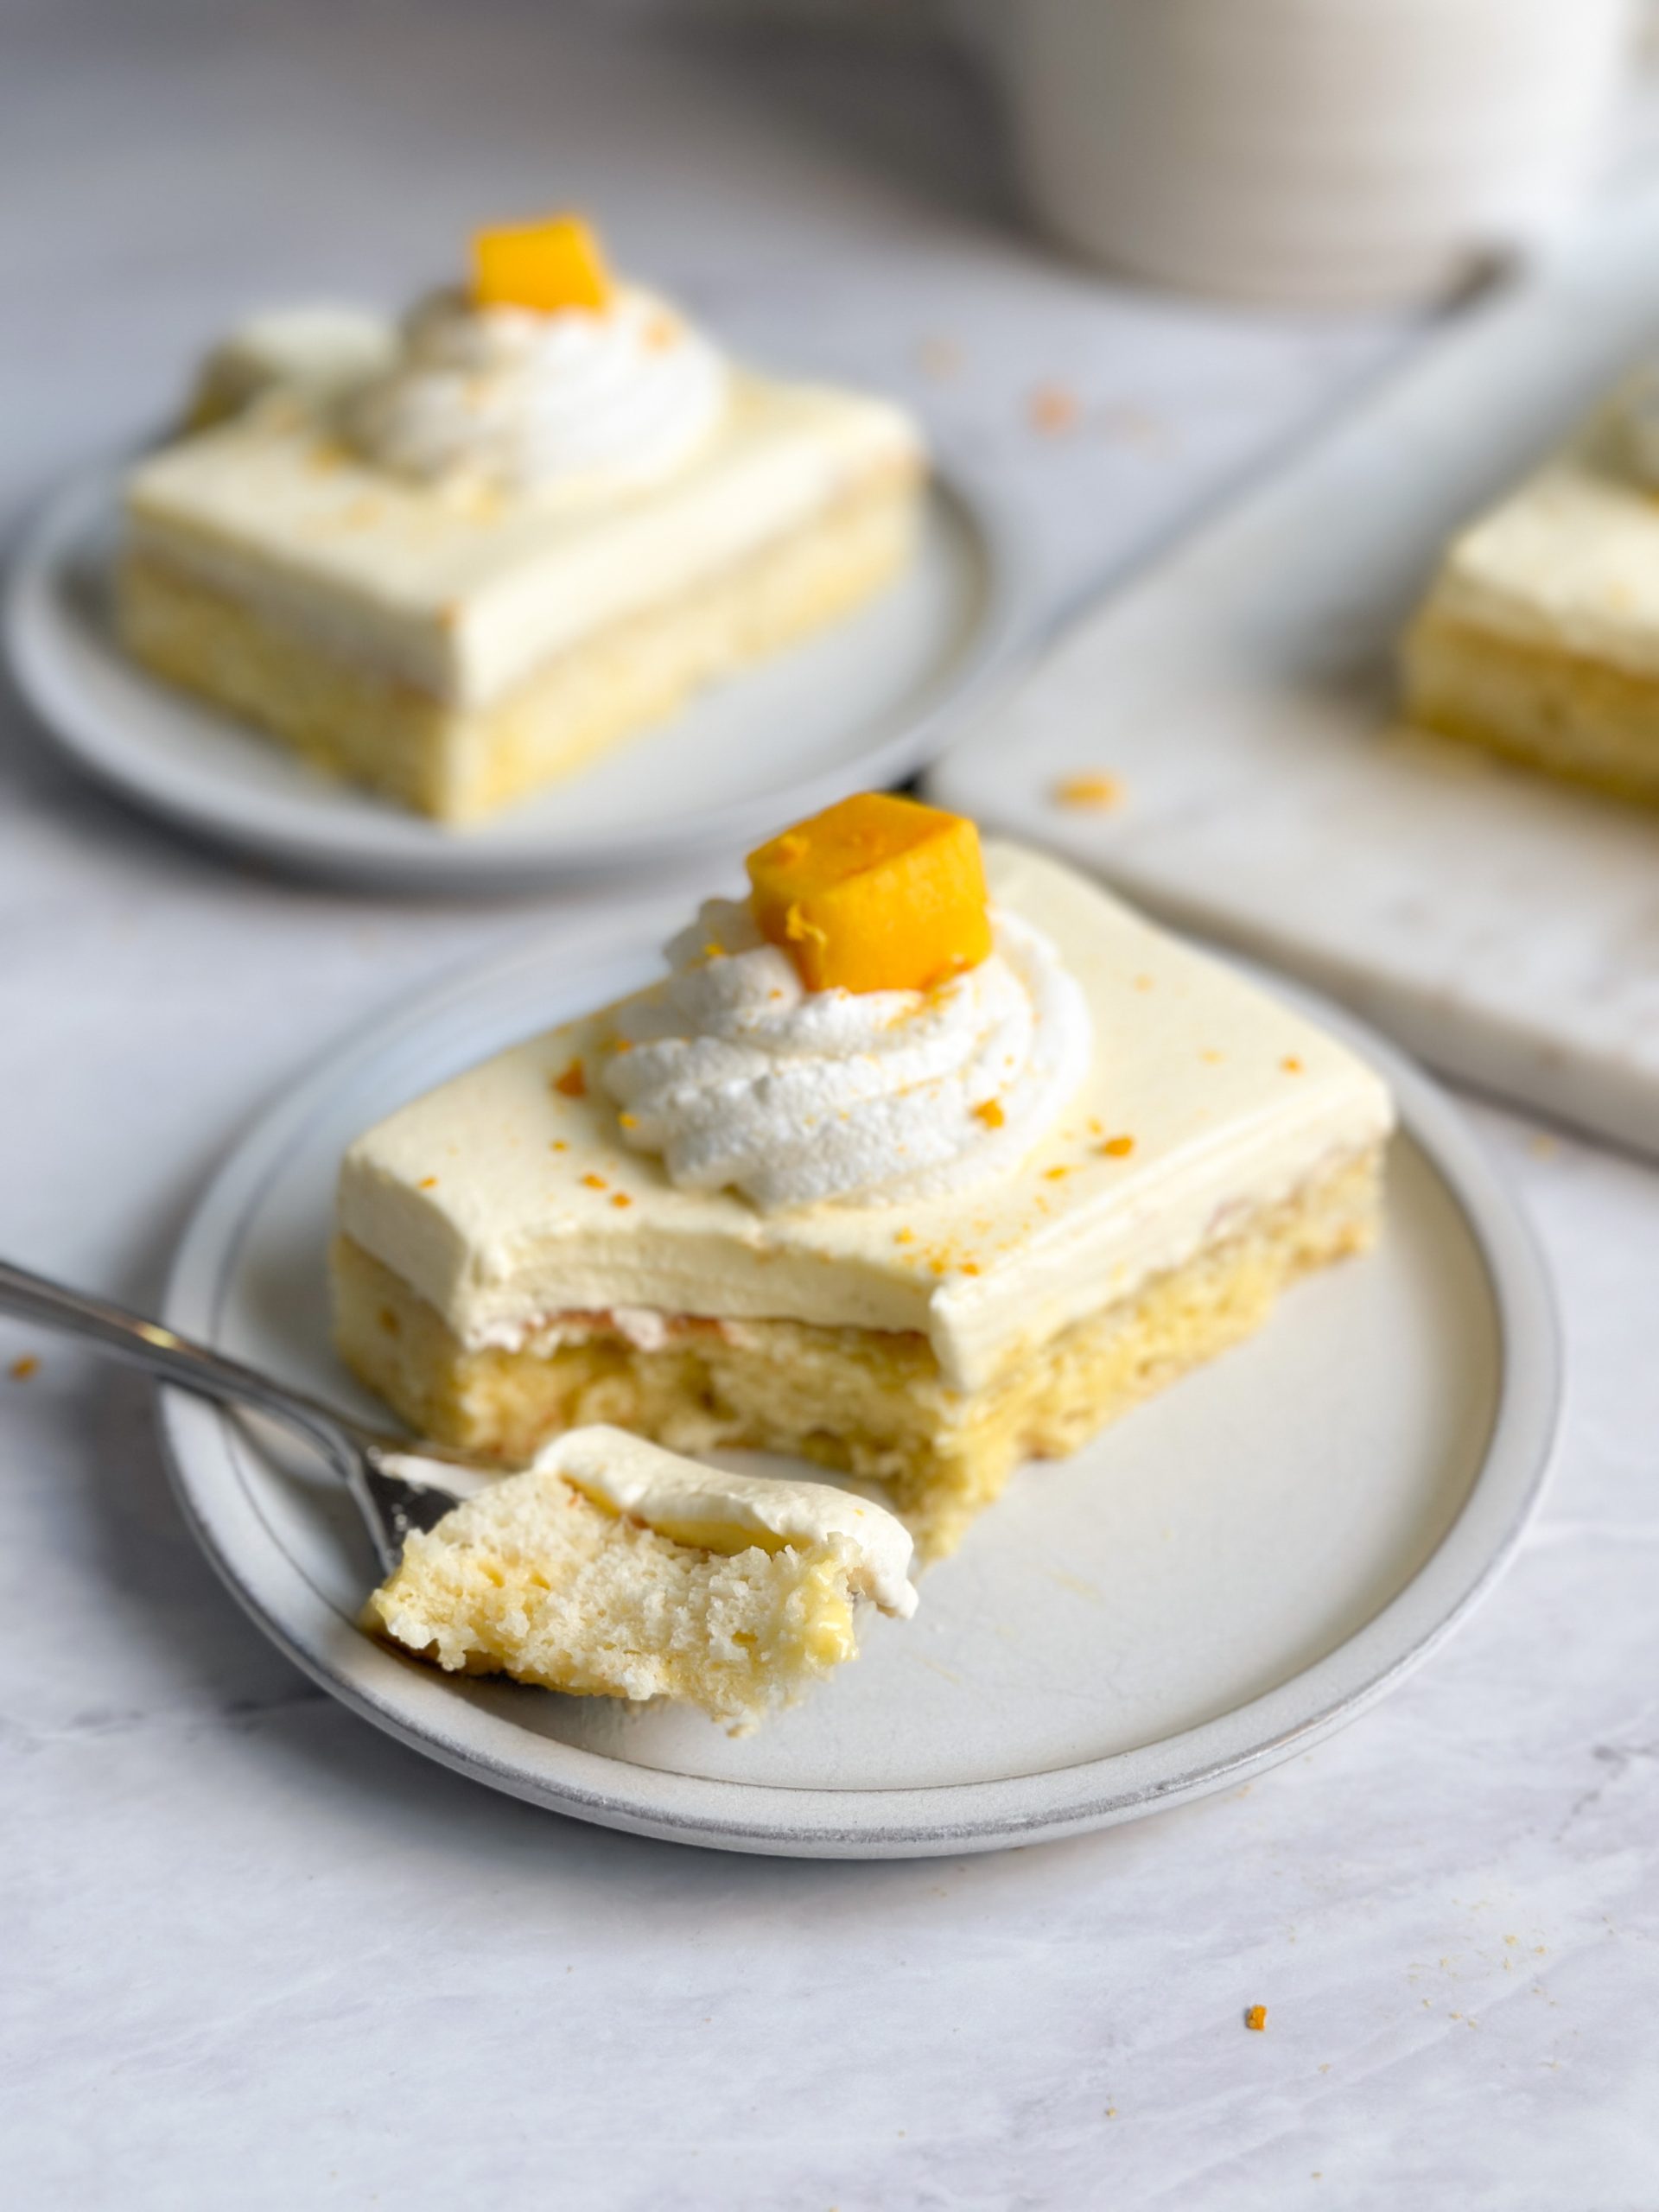 a slice of mango lassi tres leches cake on a plate with a moist interior, thick layer of mango lassi whipped cream, and whipped cream and mango decoration